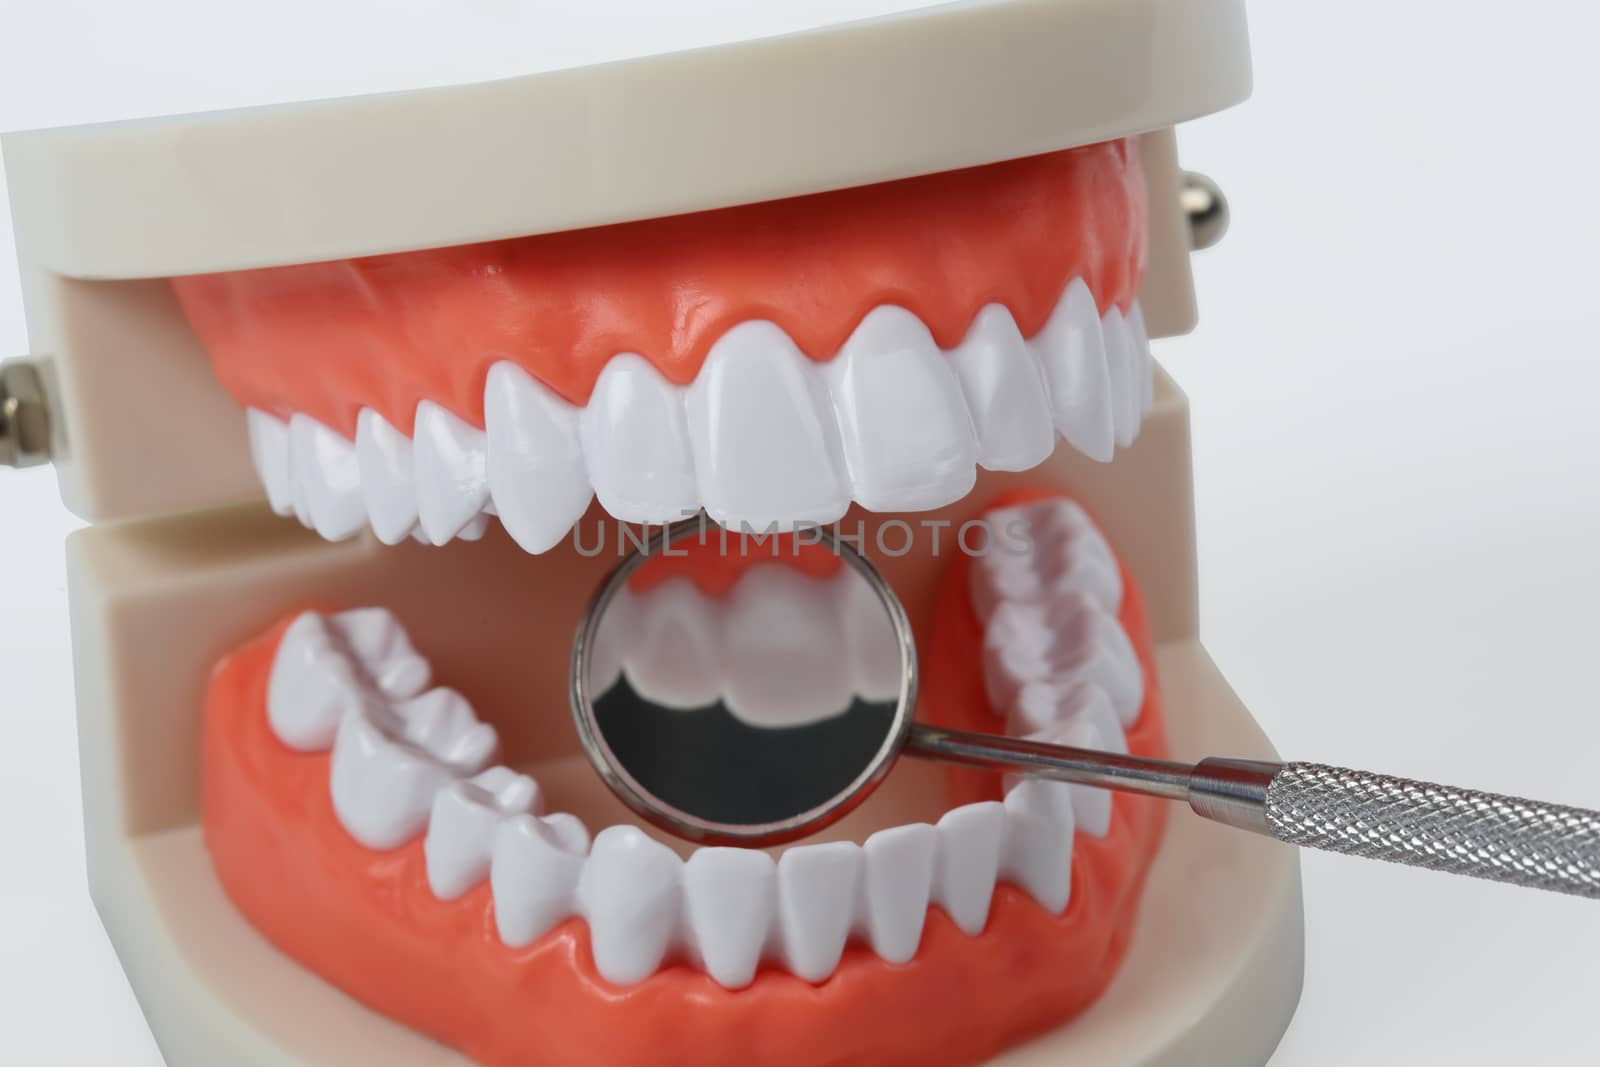 White teeth model  isolated with clipping path by phalakon